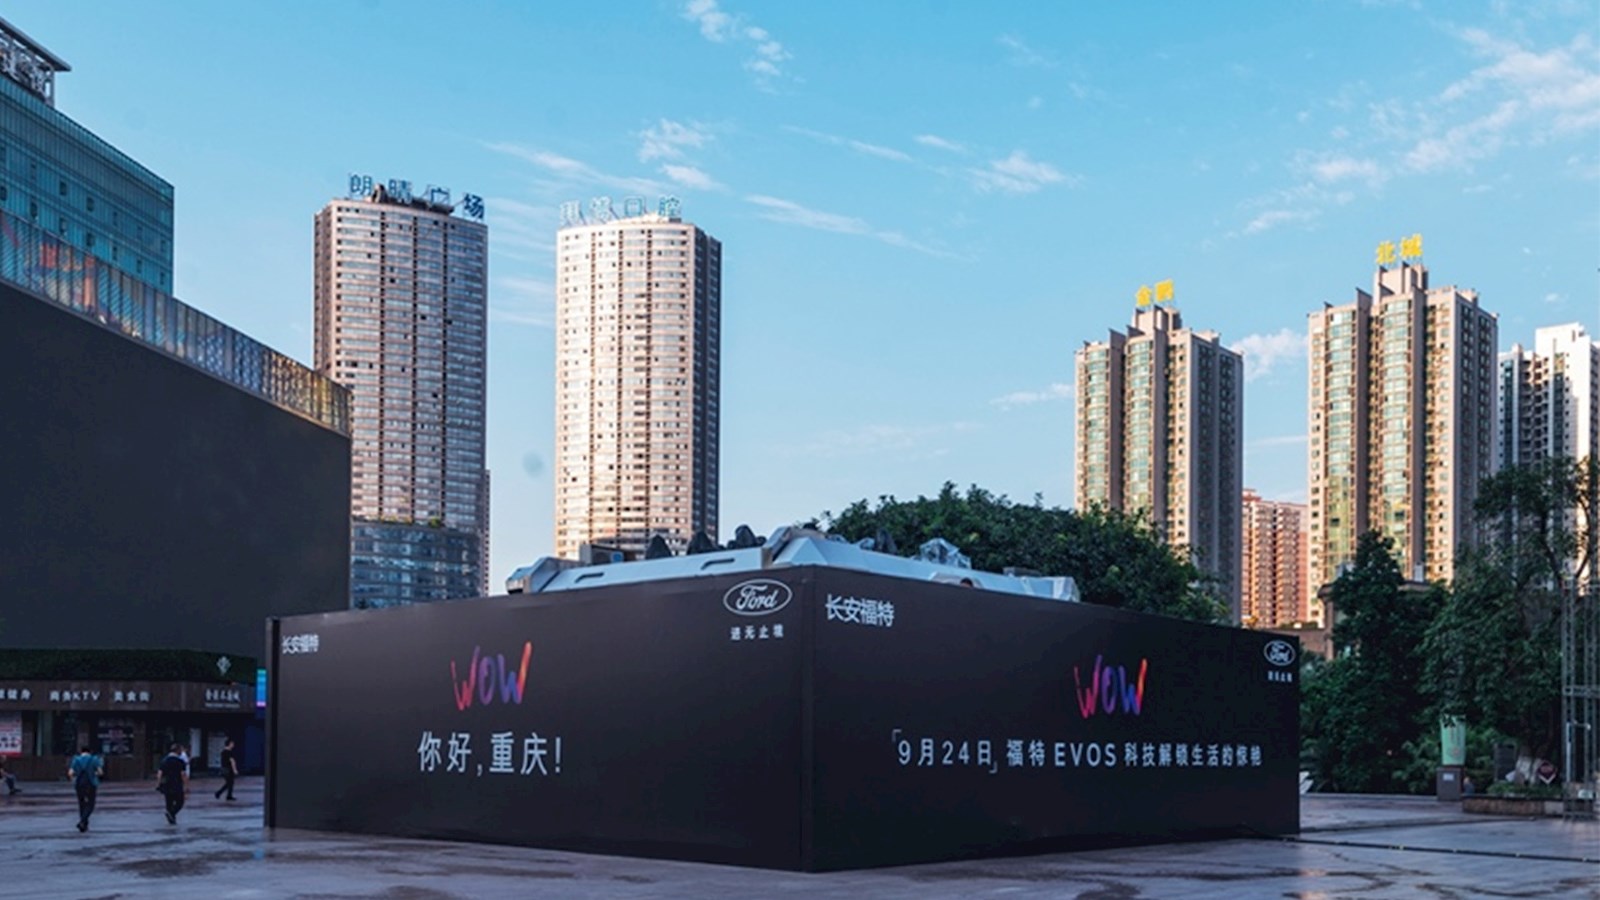 Metaverse mystery box in a Chinese city